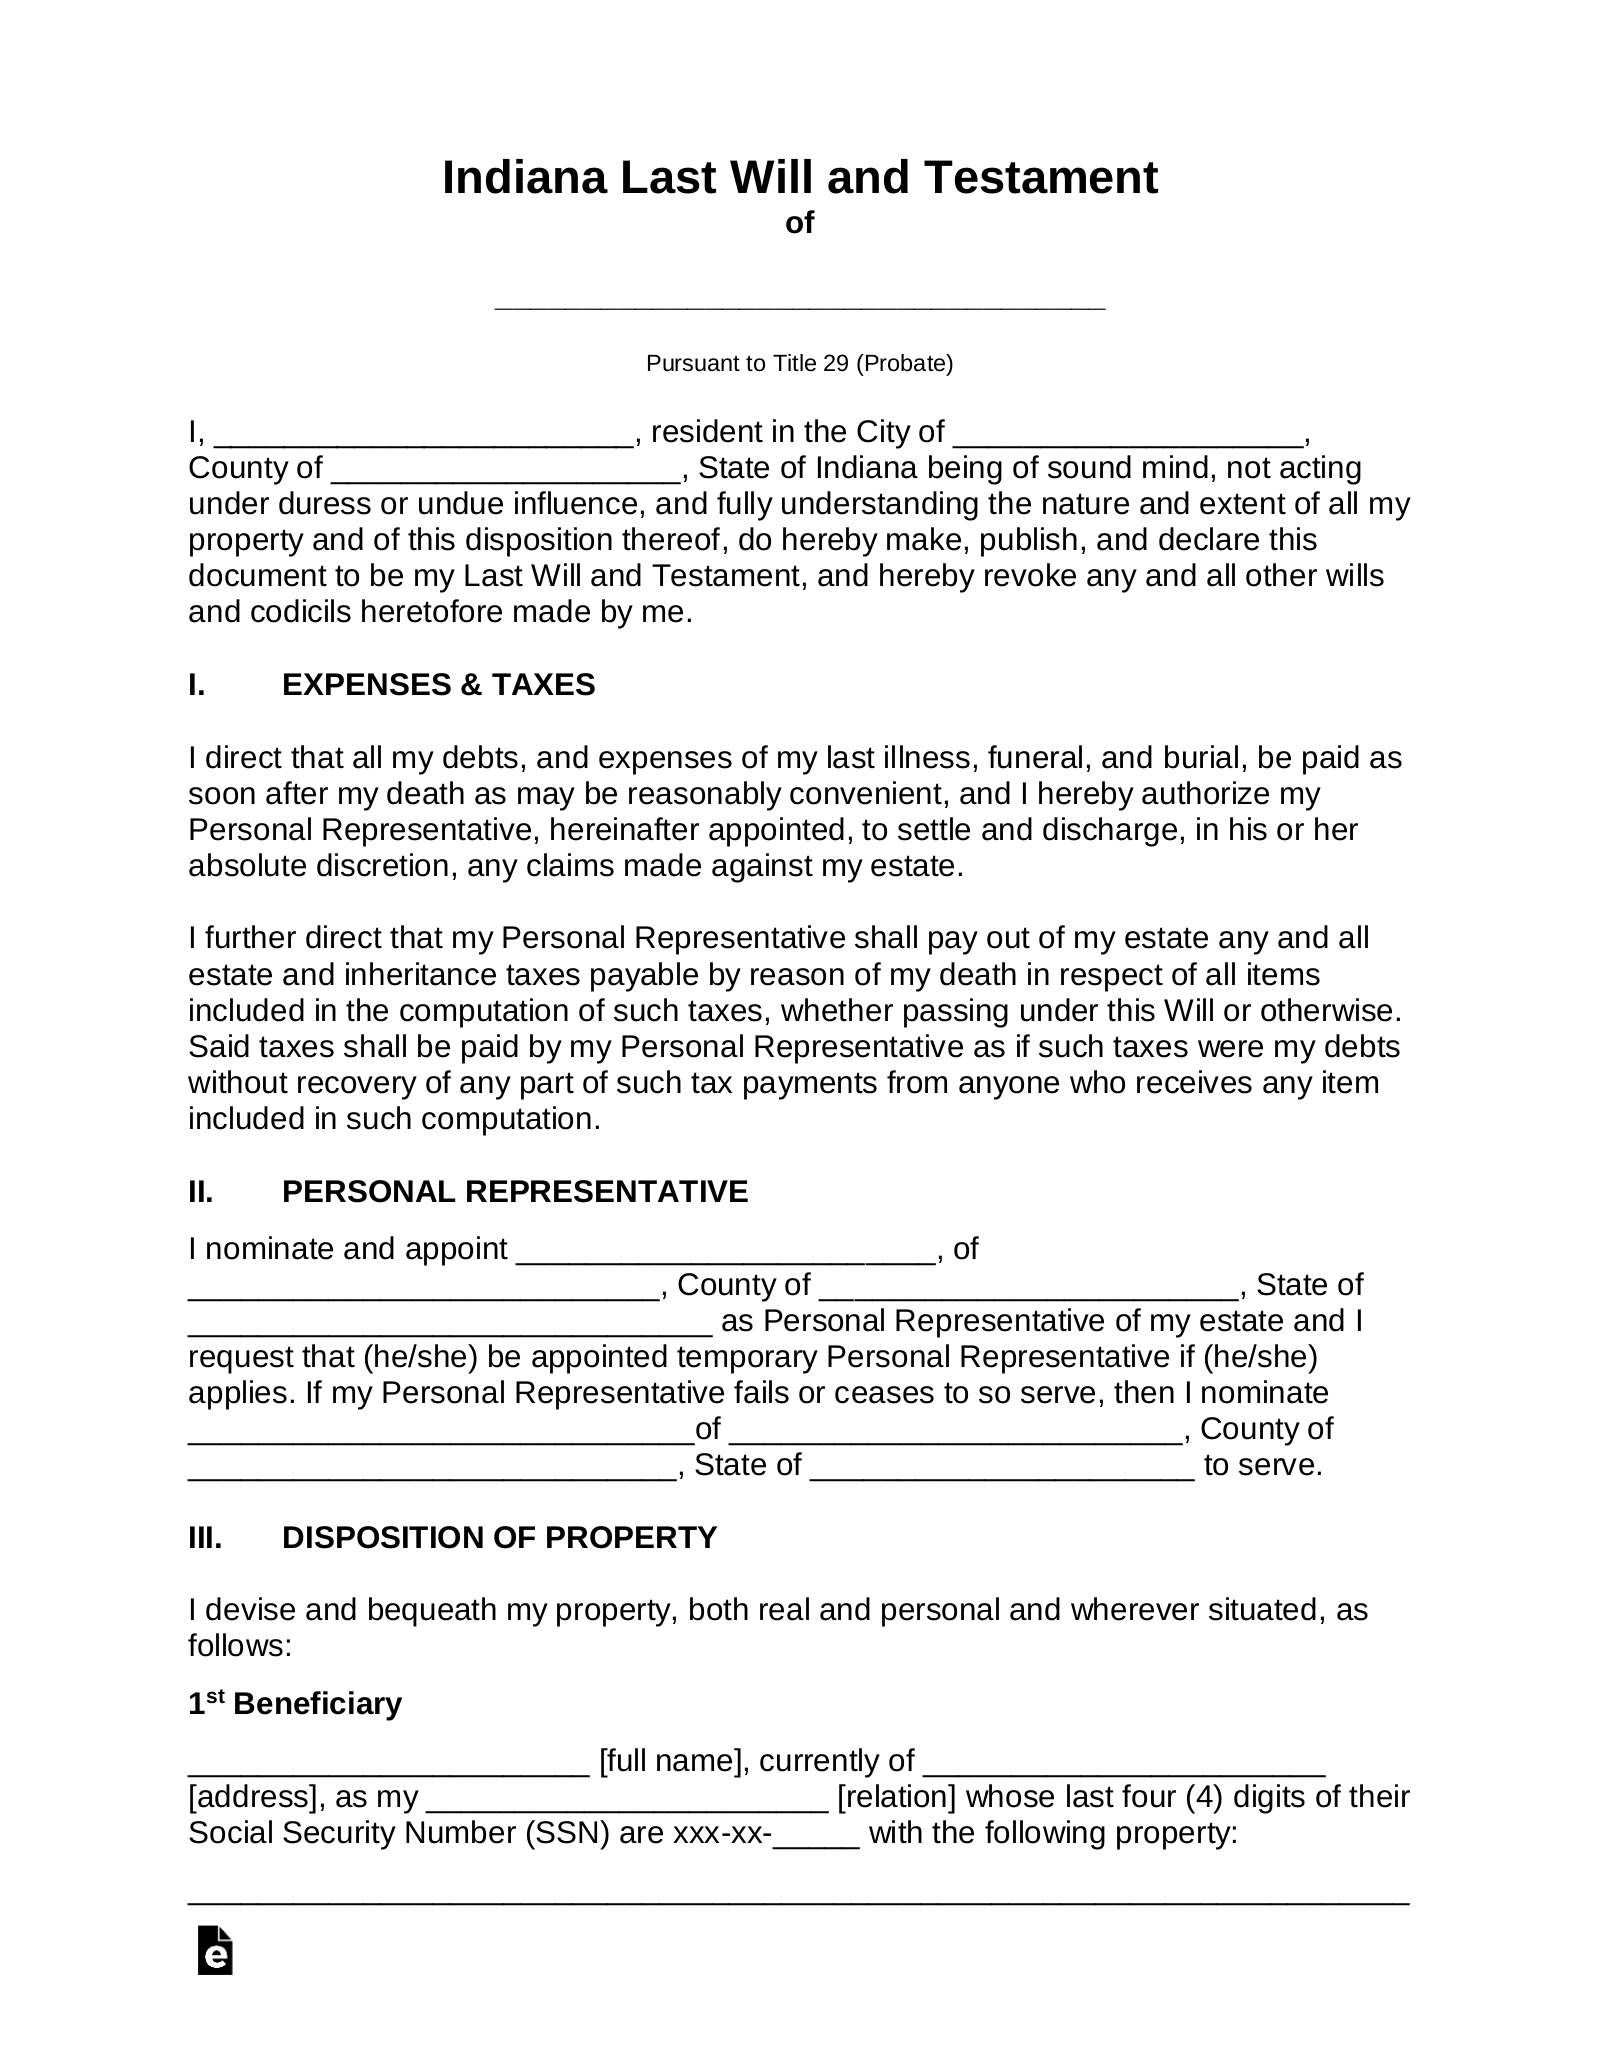 Indiana Last Will and Testament Template